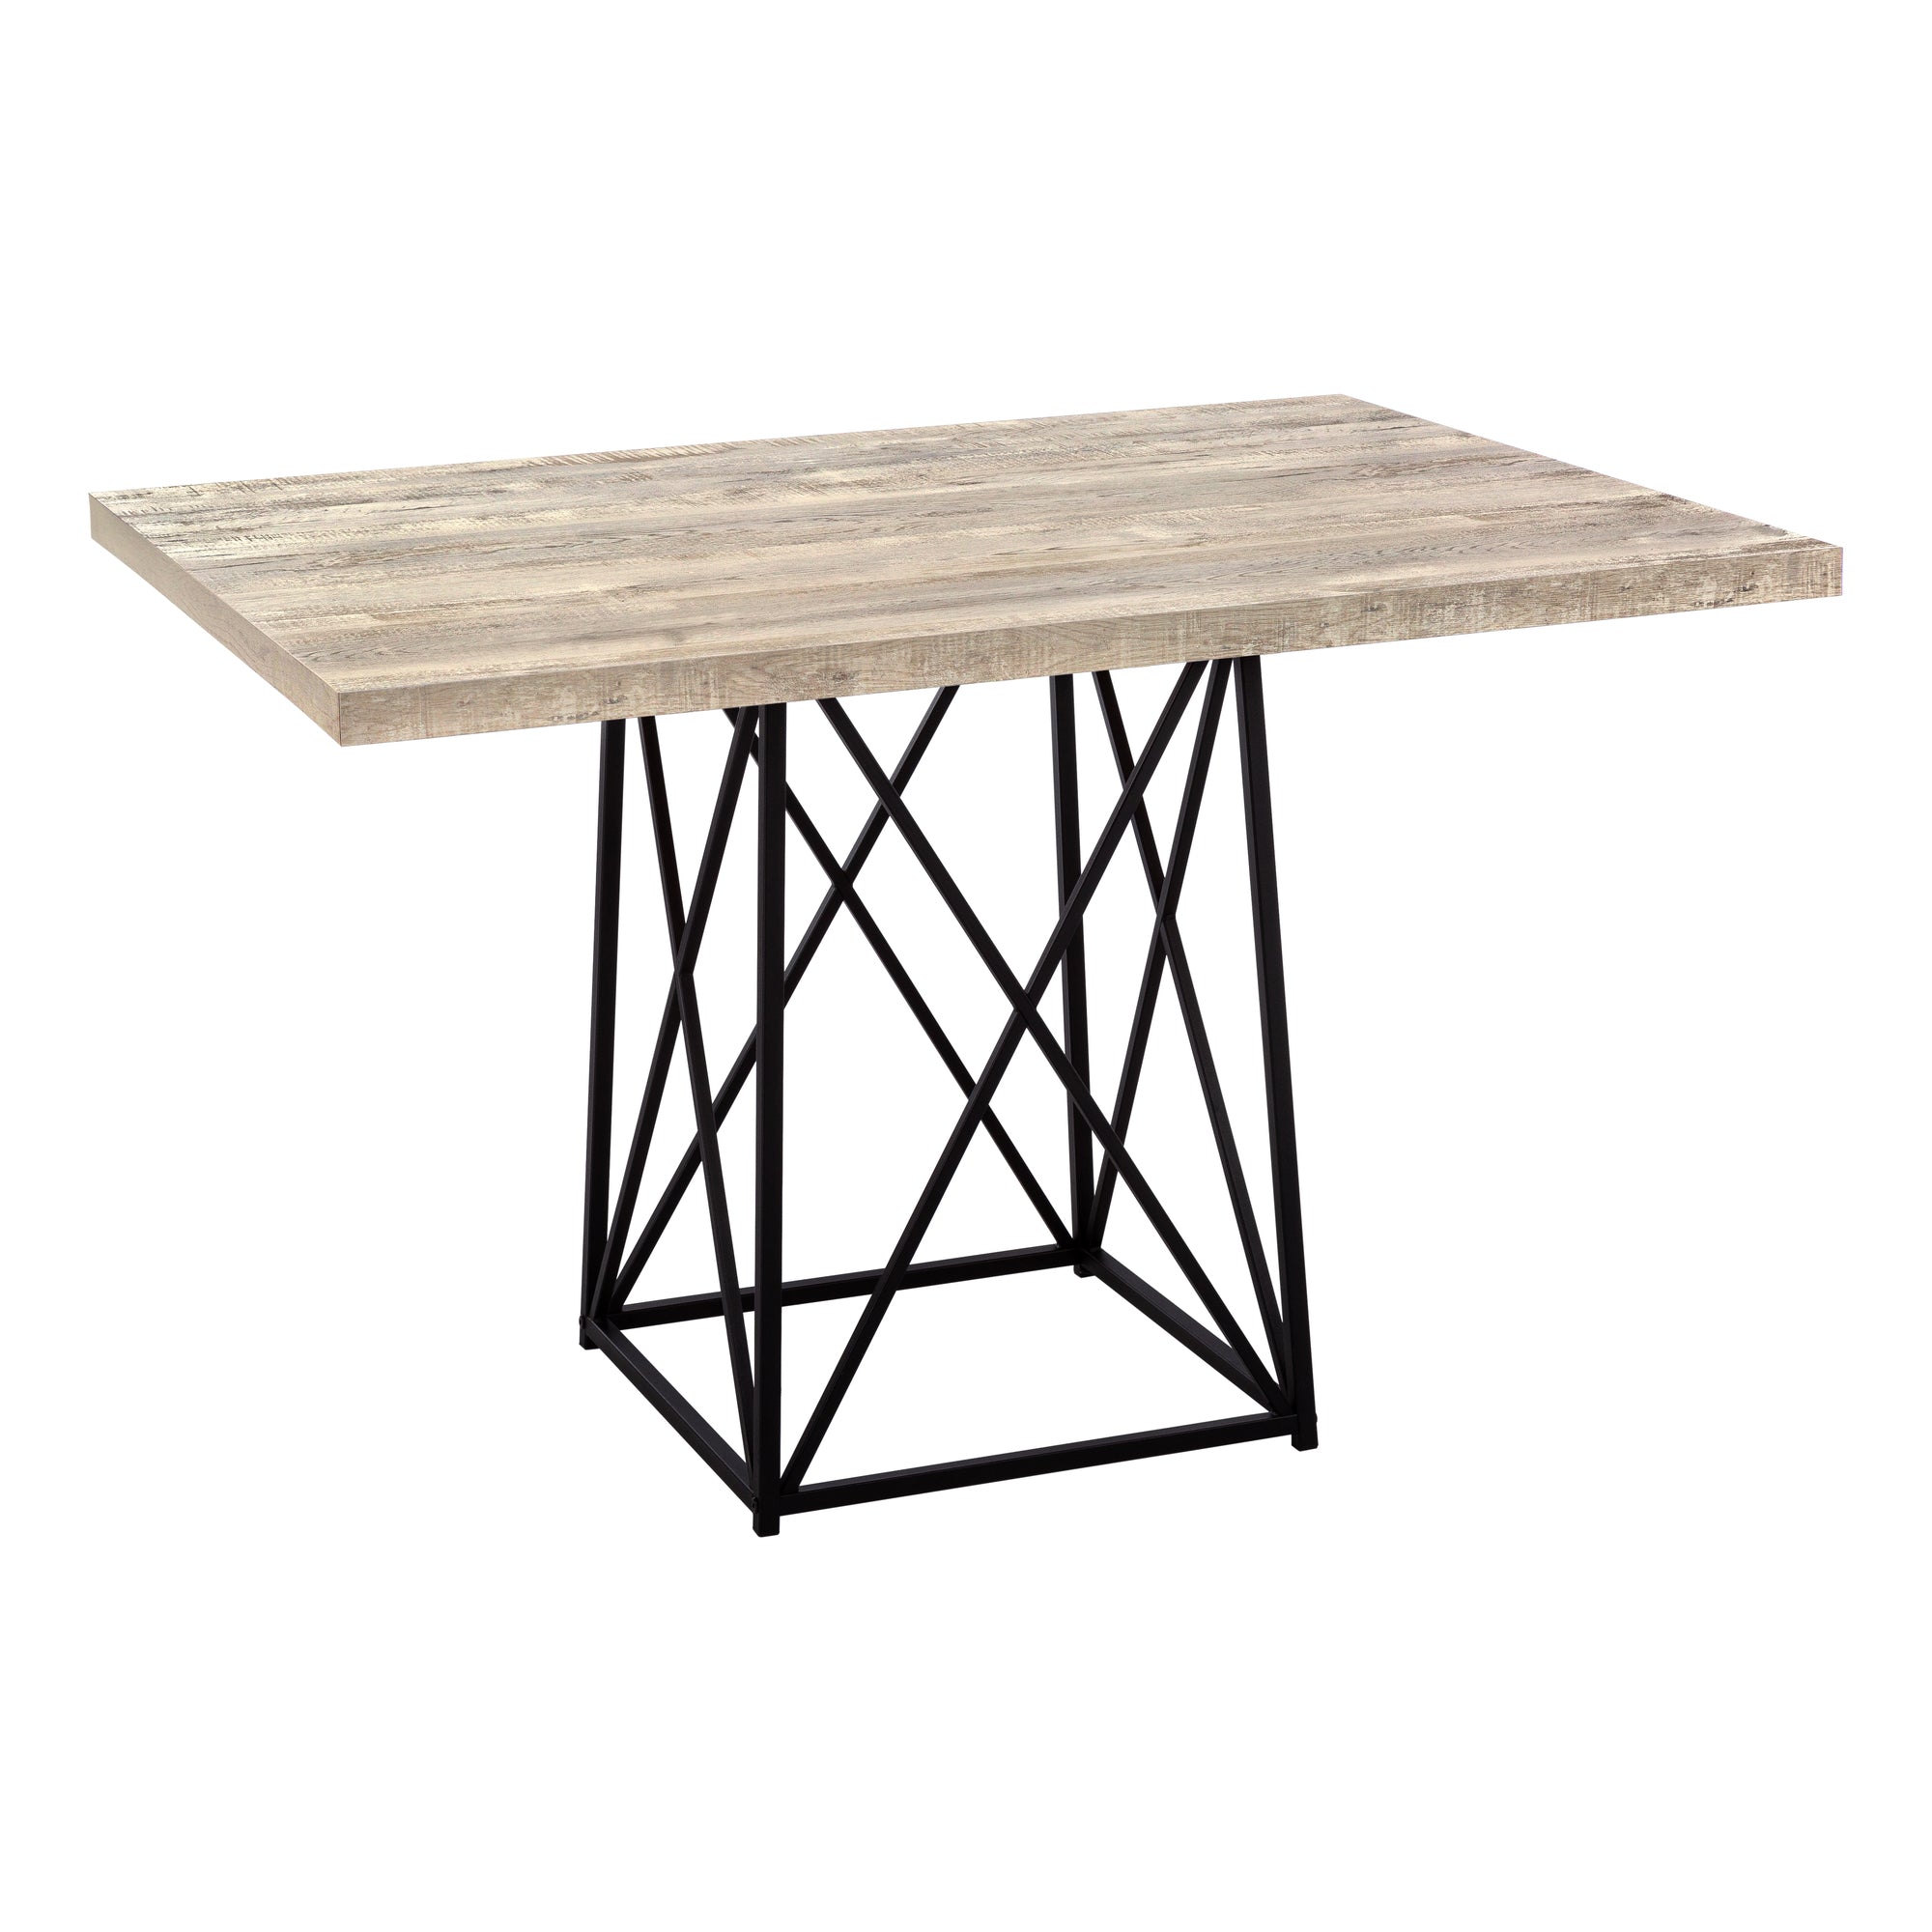 Industrial Style Reclaimed Wood-Look Square Dining Table (Taupe)